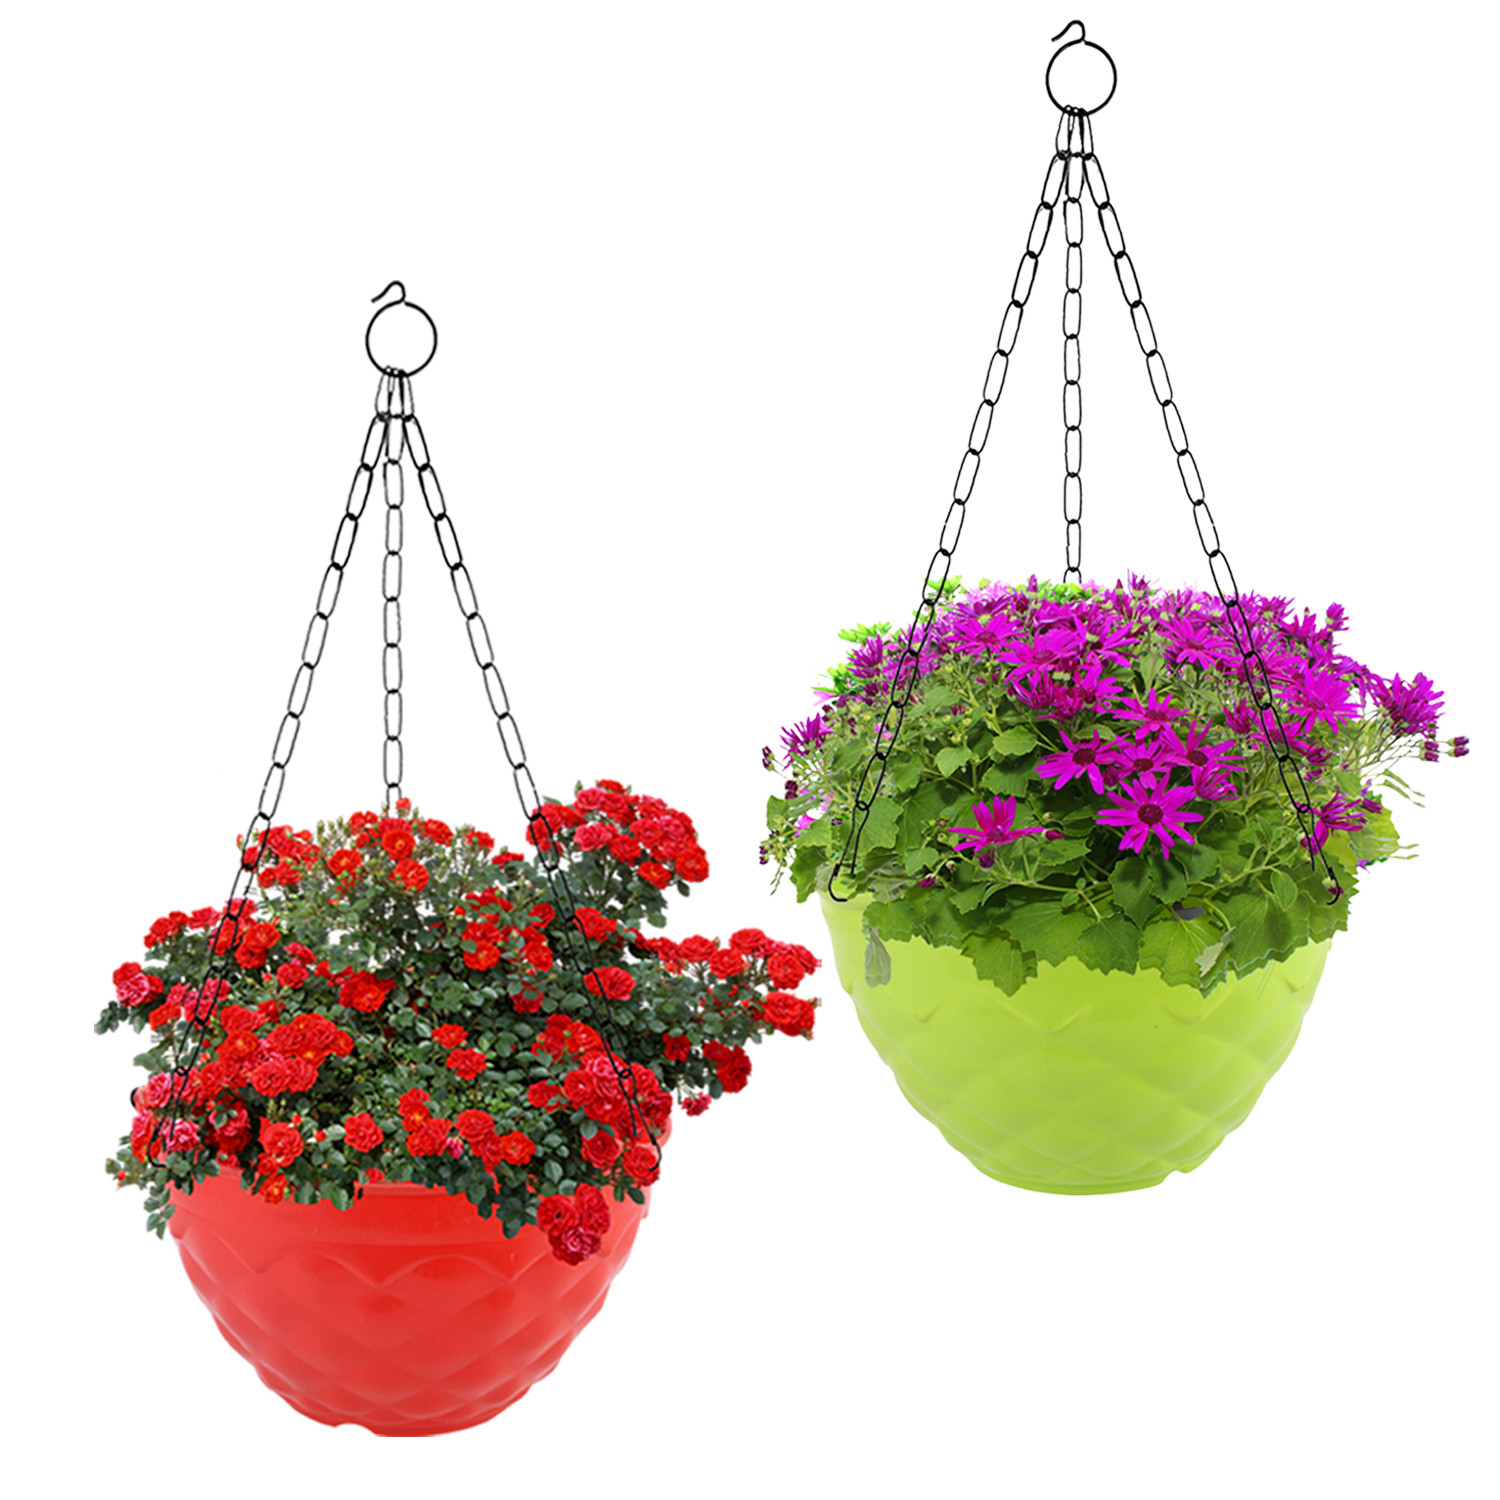 Kuber Industries Diamond Flower Pot|Durable Plastic Hanging Basket Flower Planter with Chain for Home|Garden|Balcony|Pack of 2 (Red & Green)